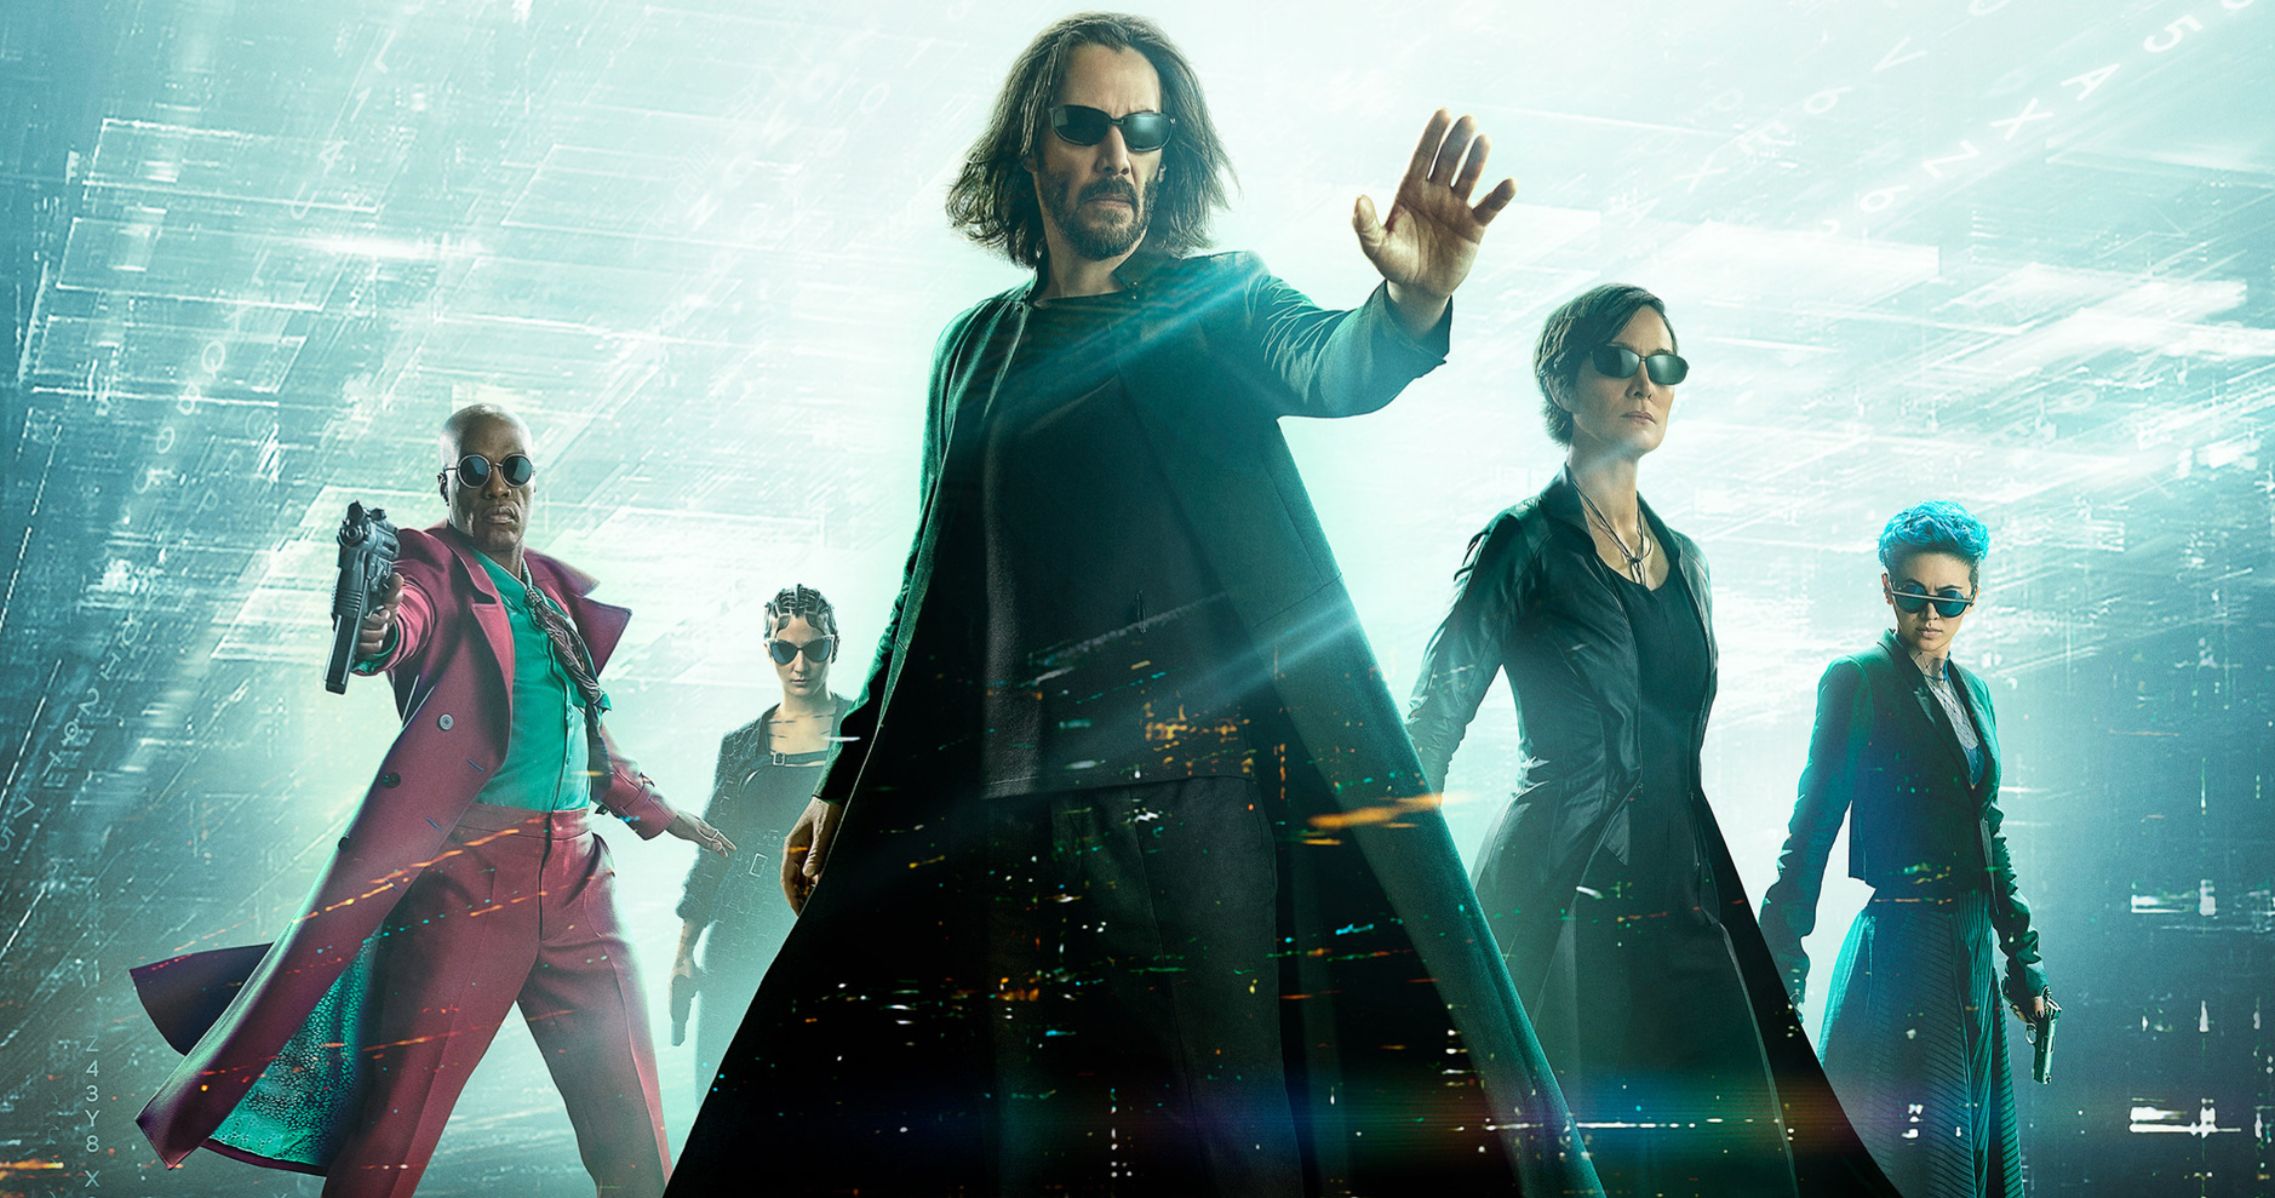 The Matrix Resurrections Poster Has Neo’s Crew Ready for a New Cyber War